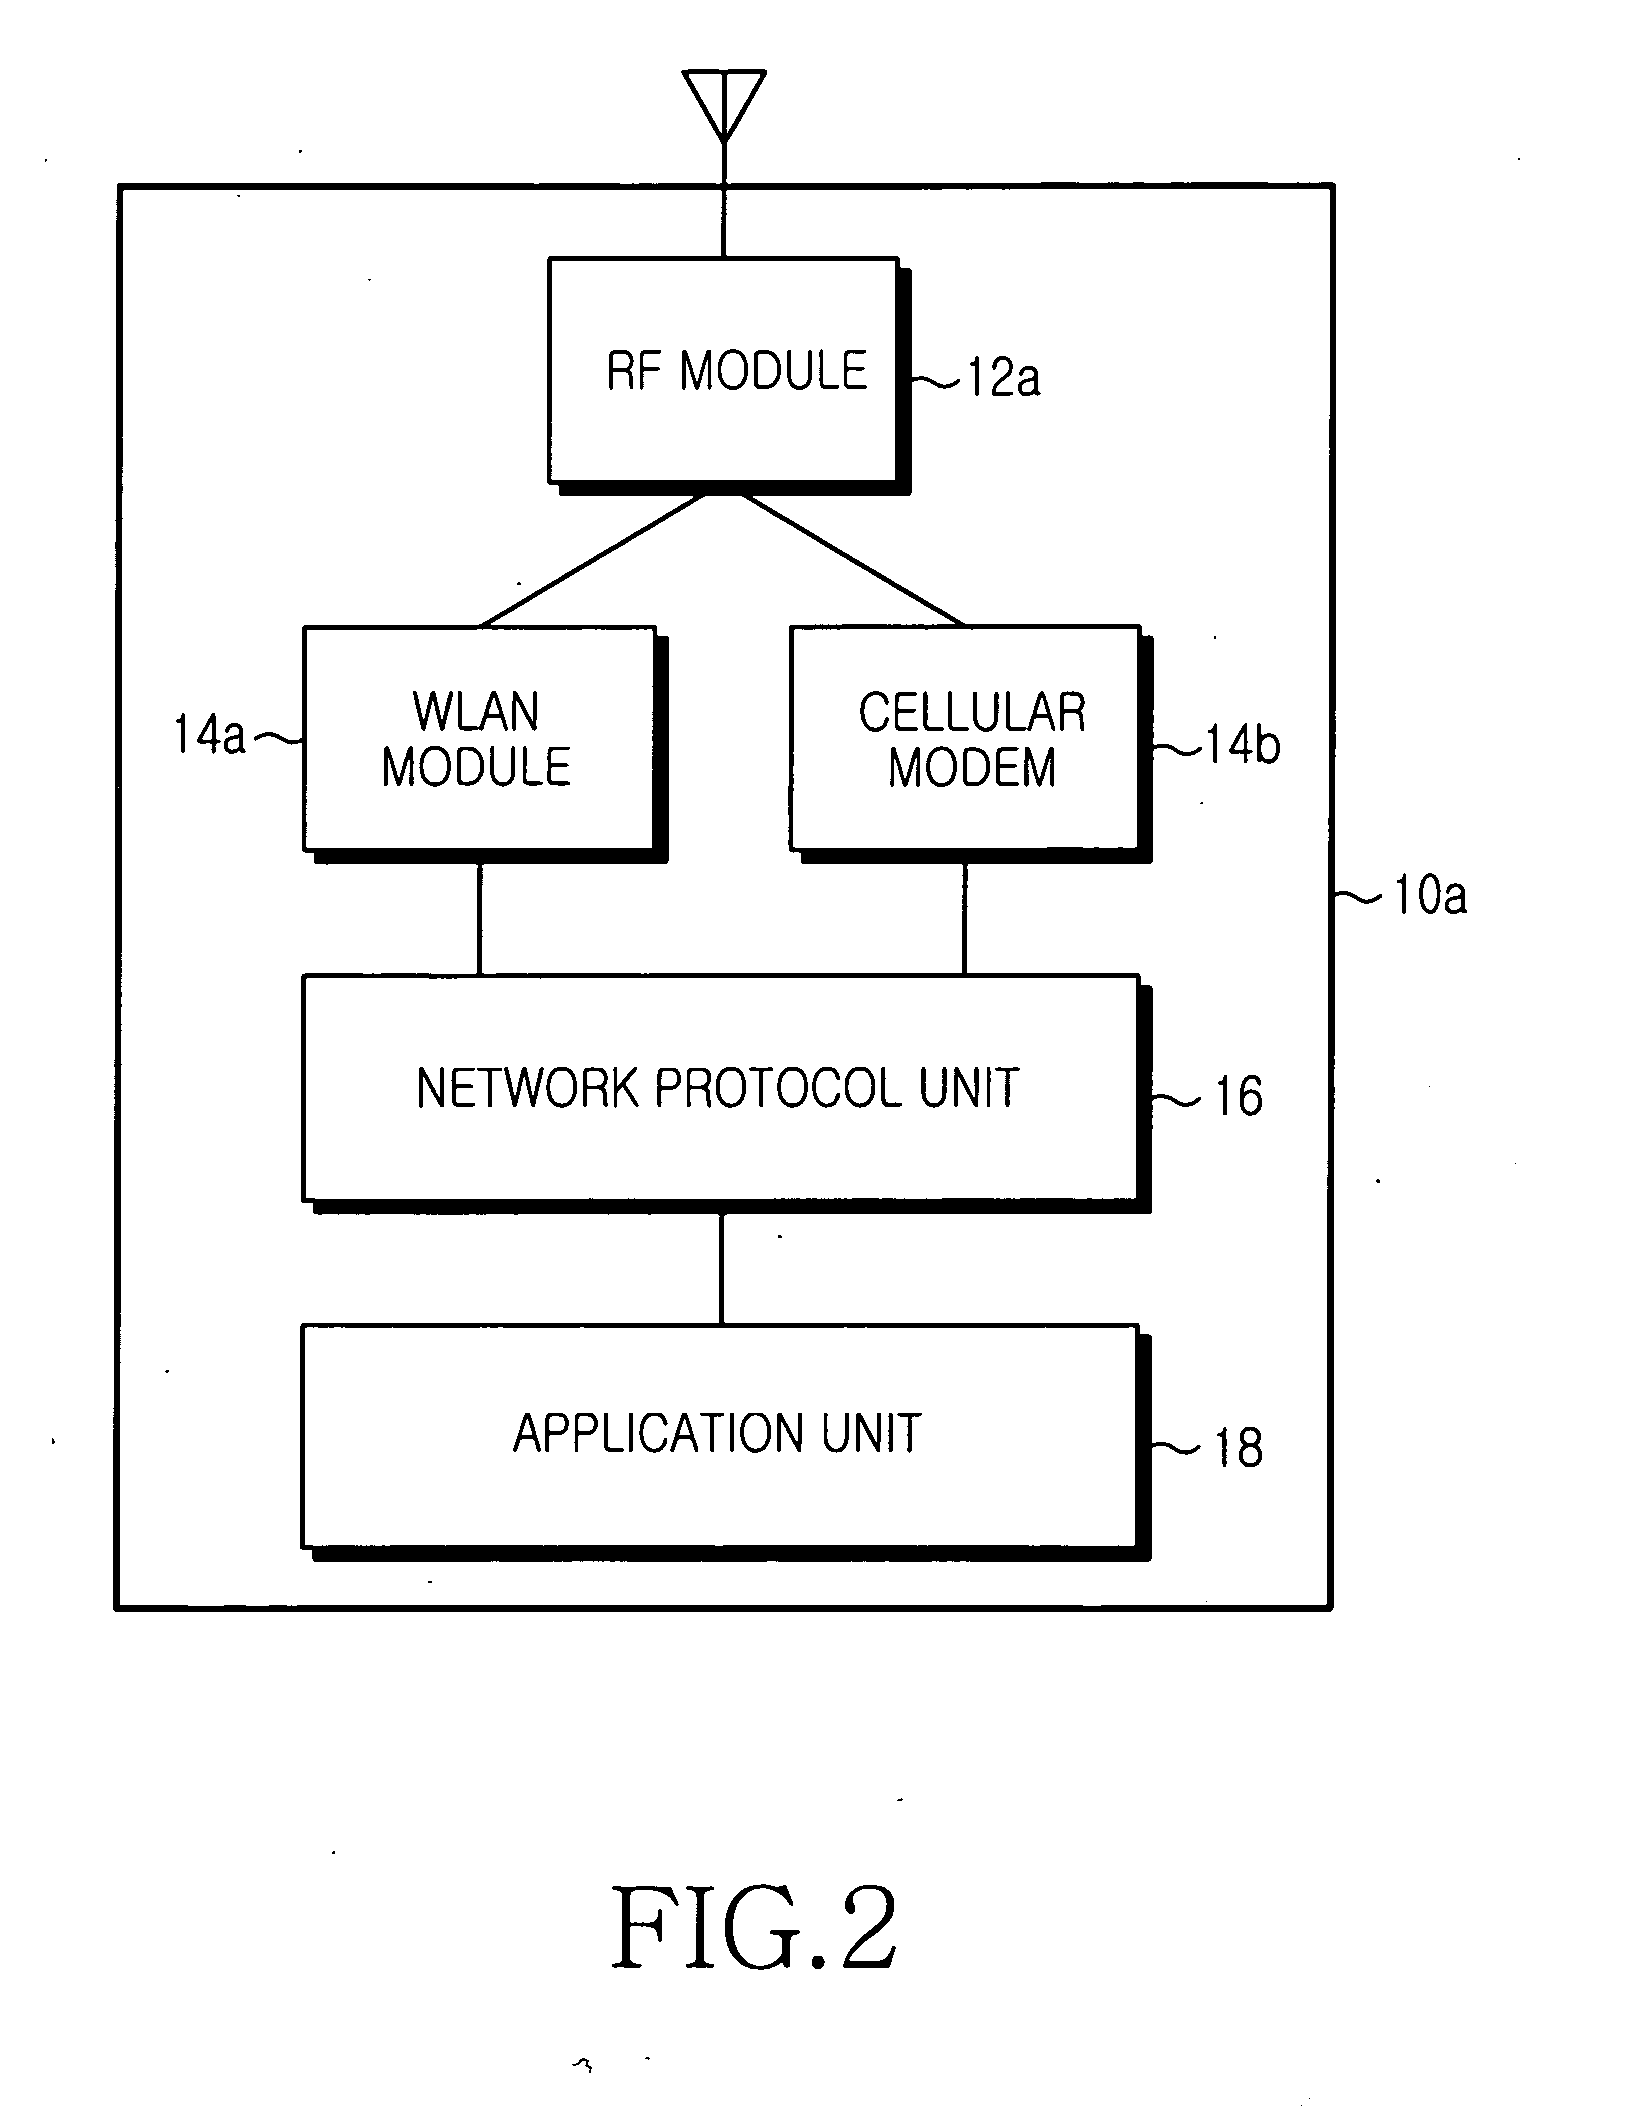 Method and system for providing information on interworking between mobile communication network and wireless local area network